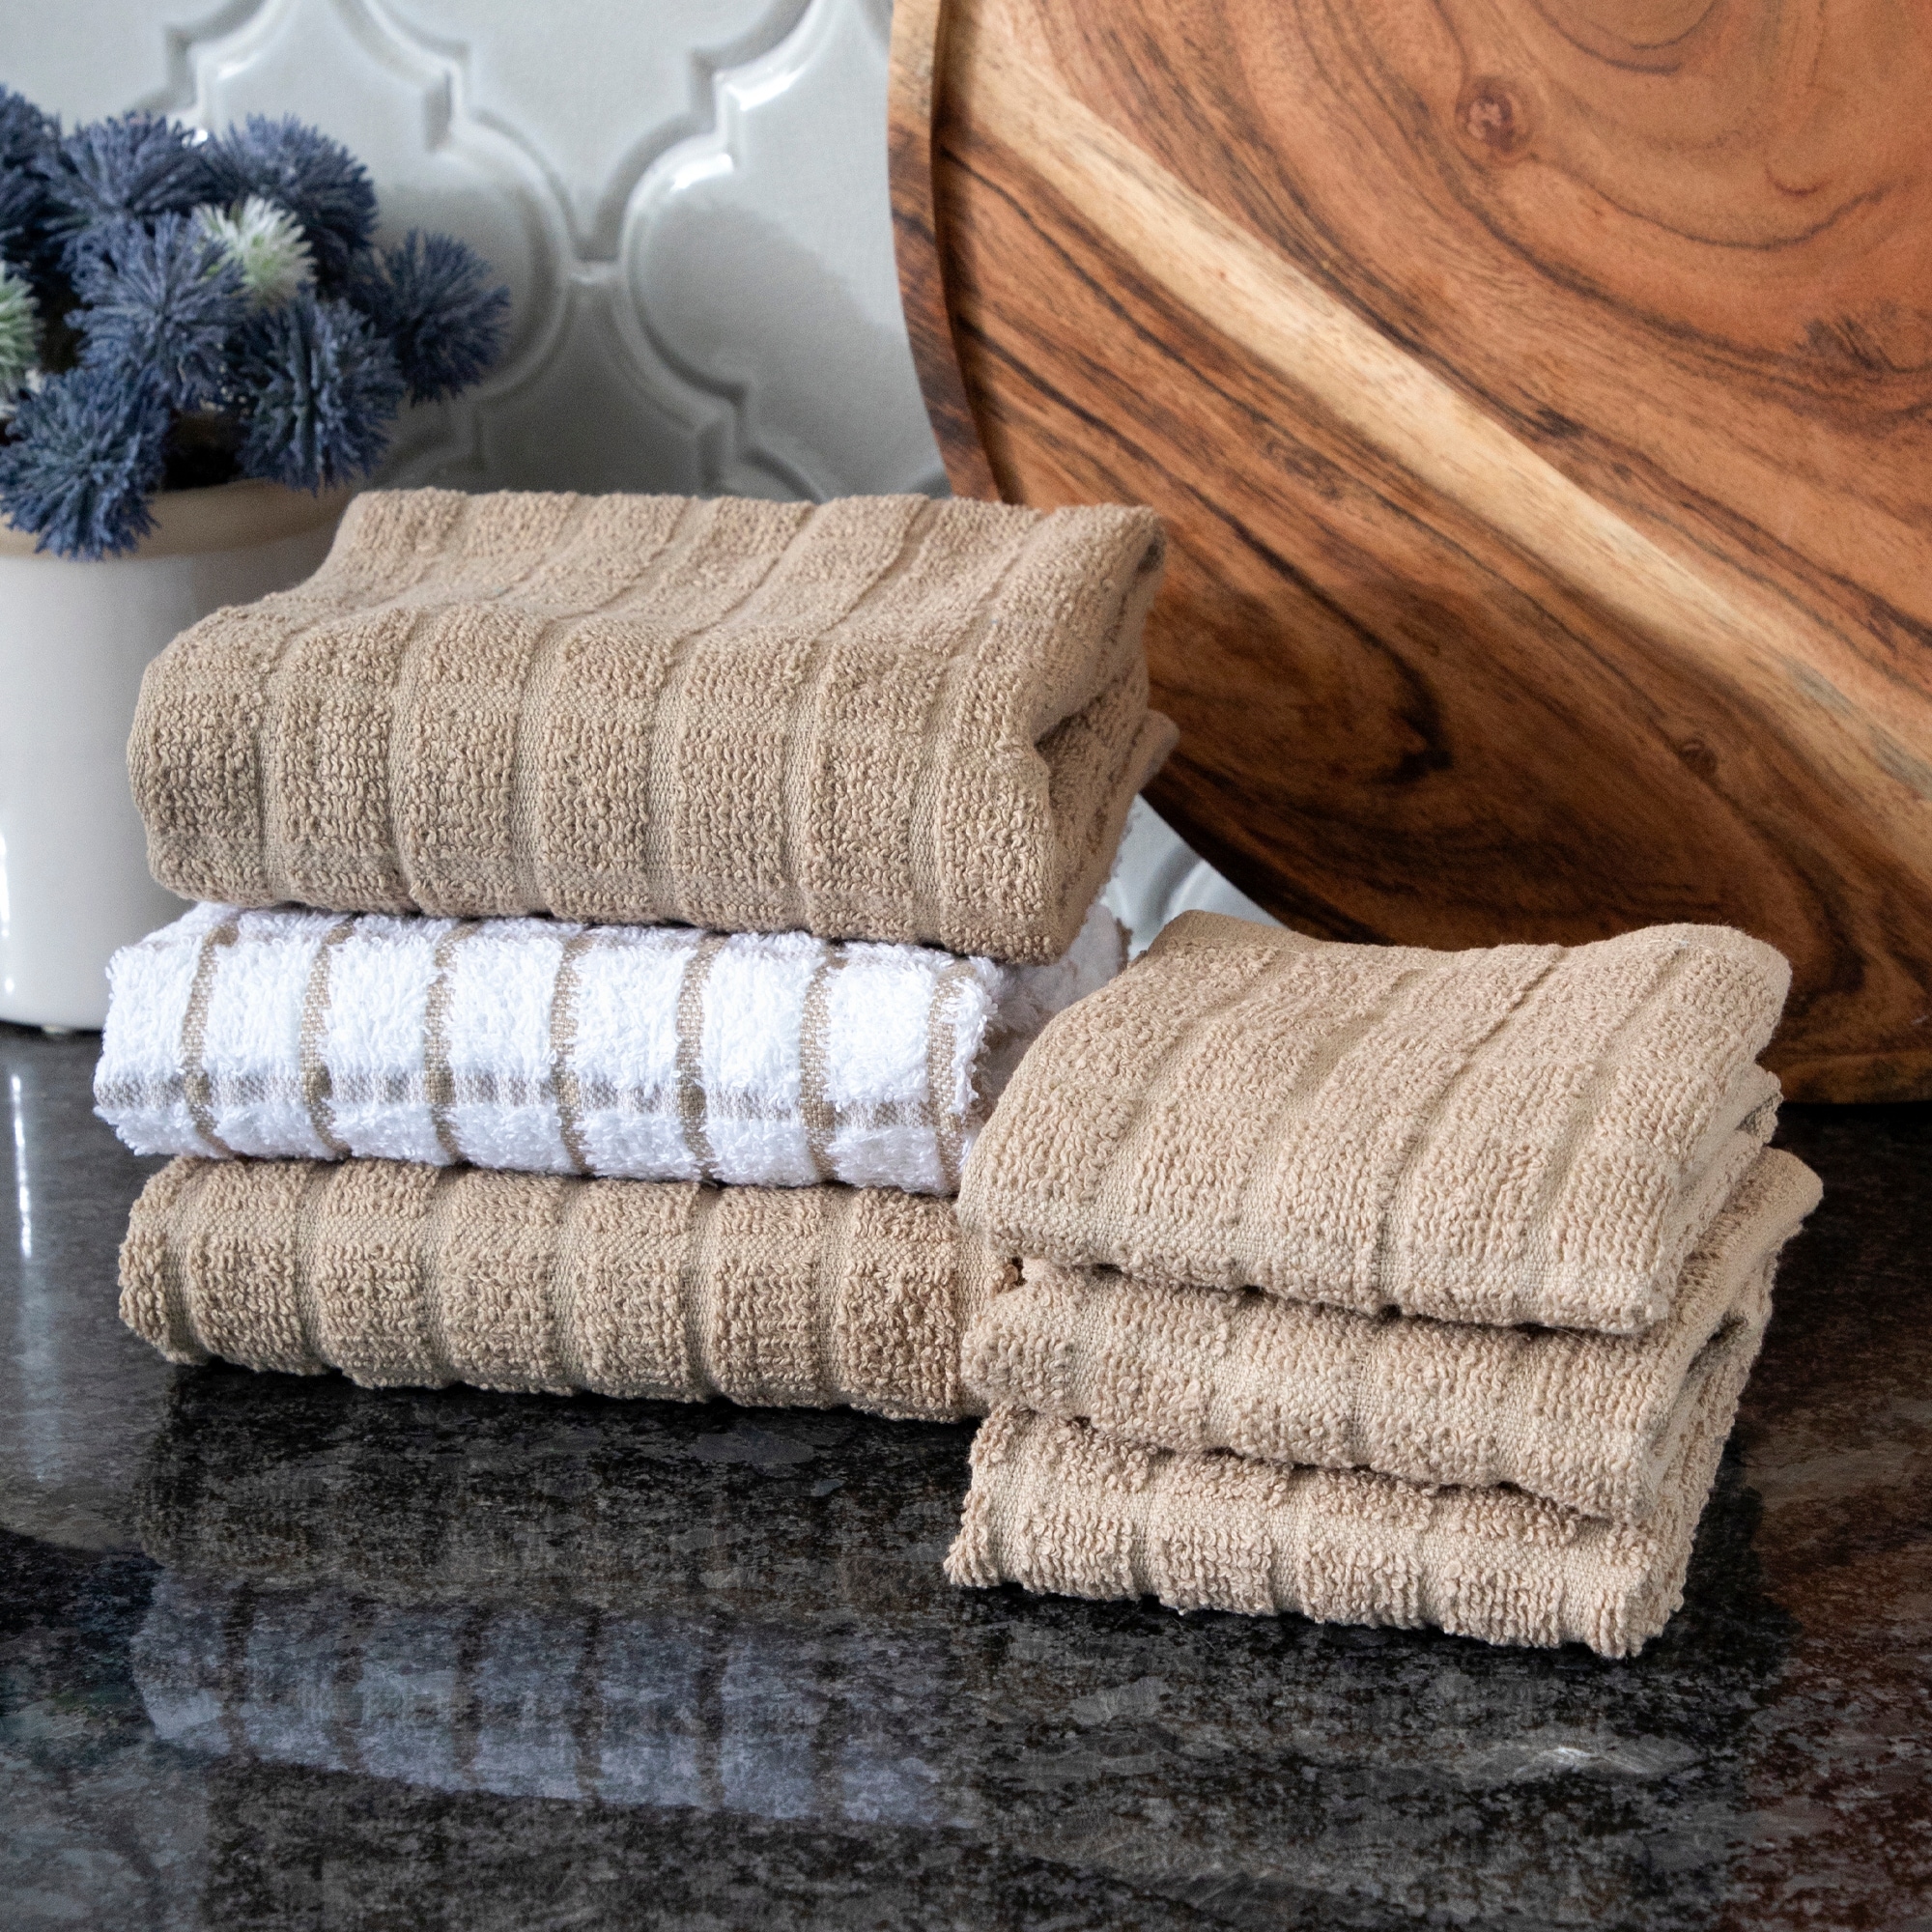 https://ak1.ostkcdn.com/images/products/is/images/direct/fb347af47ada8e7ae8264adddb33b590e44d61b8/RITZ-Terry-Kitchen-Towel-and-Dish-Cloth%2C-Set-of-3-Towels-and-3-Dish-Cloths.jpg